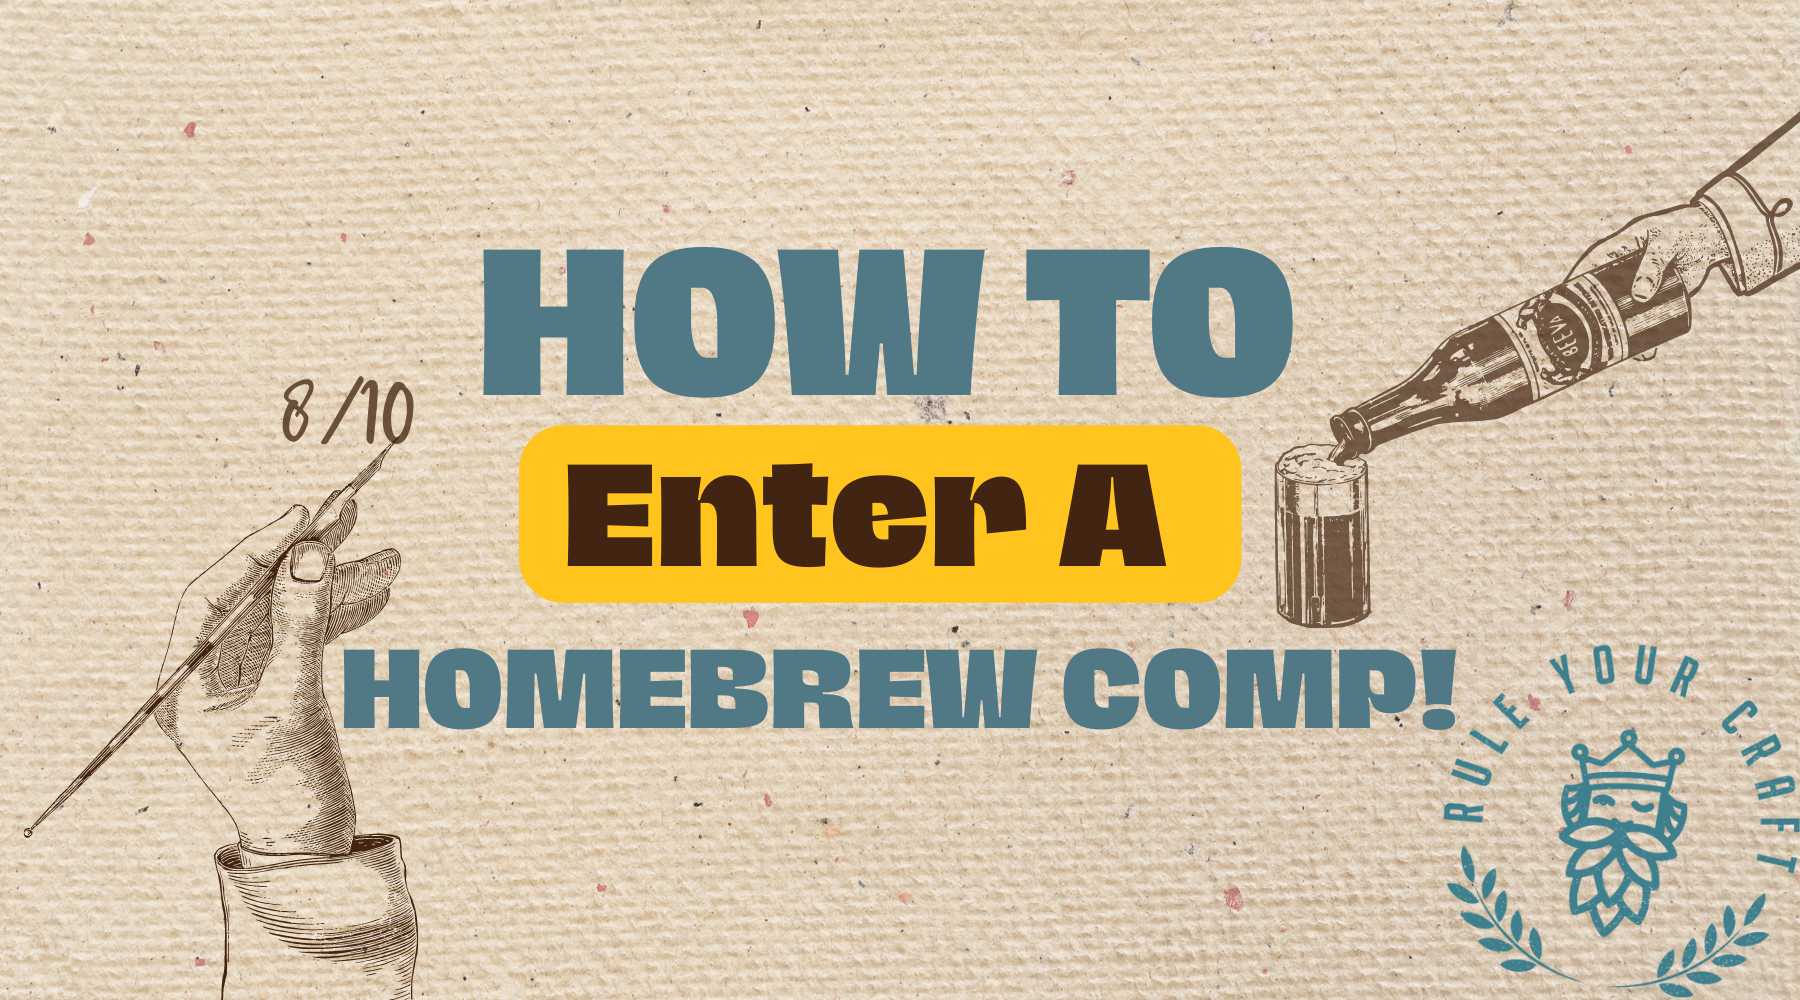 How to Enter a Homebrew Competition